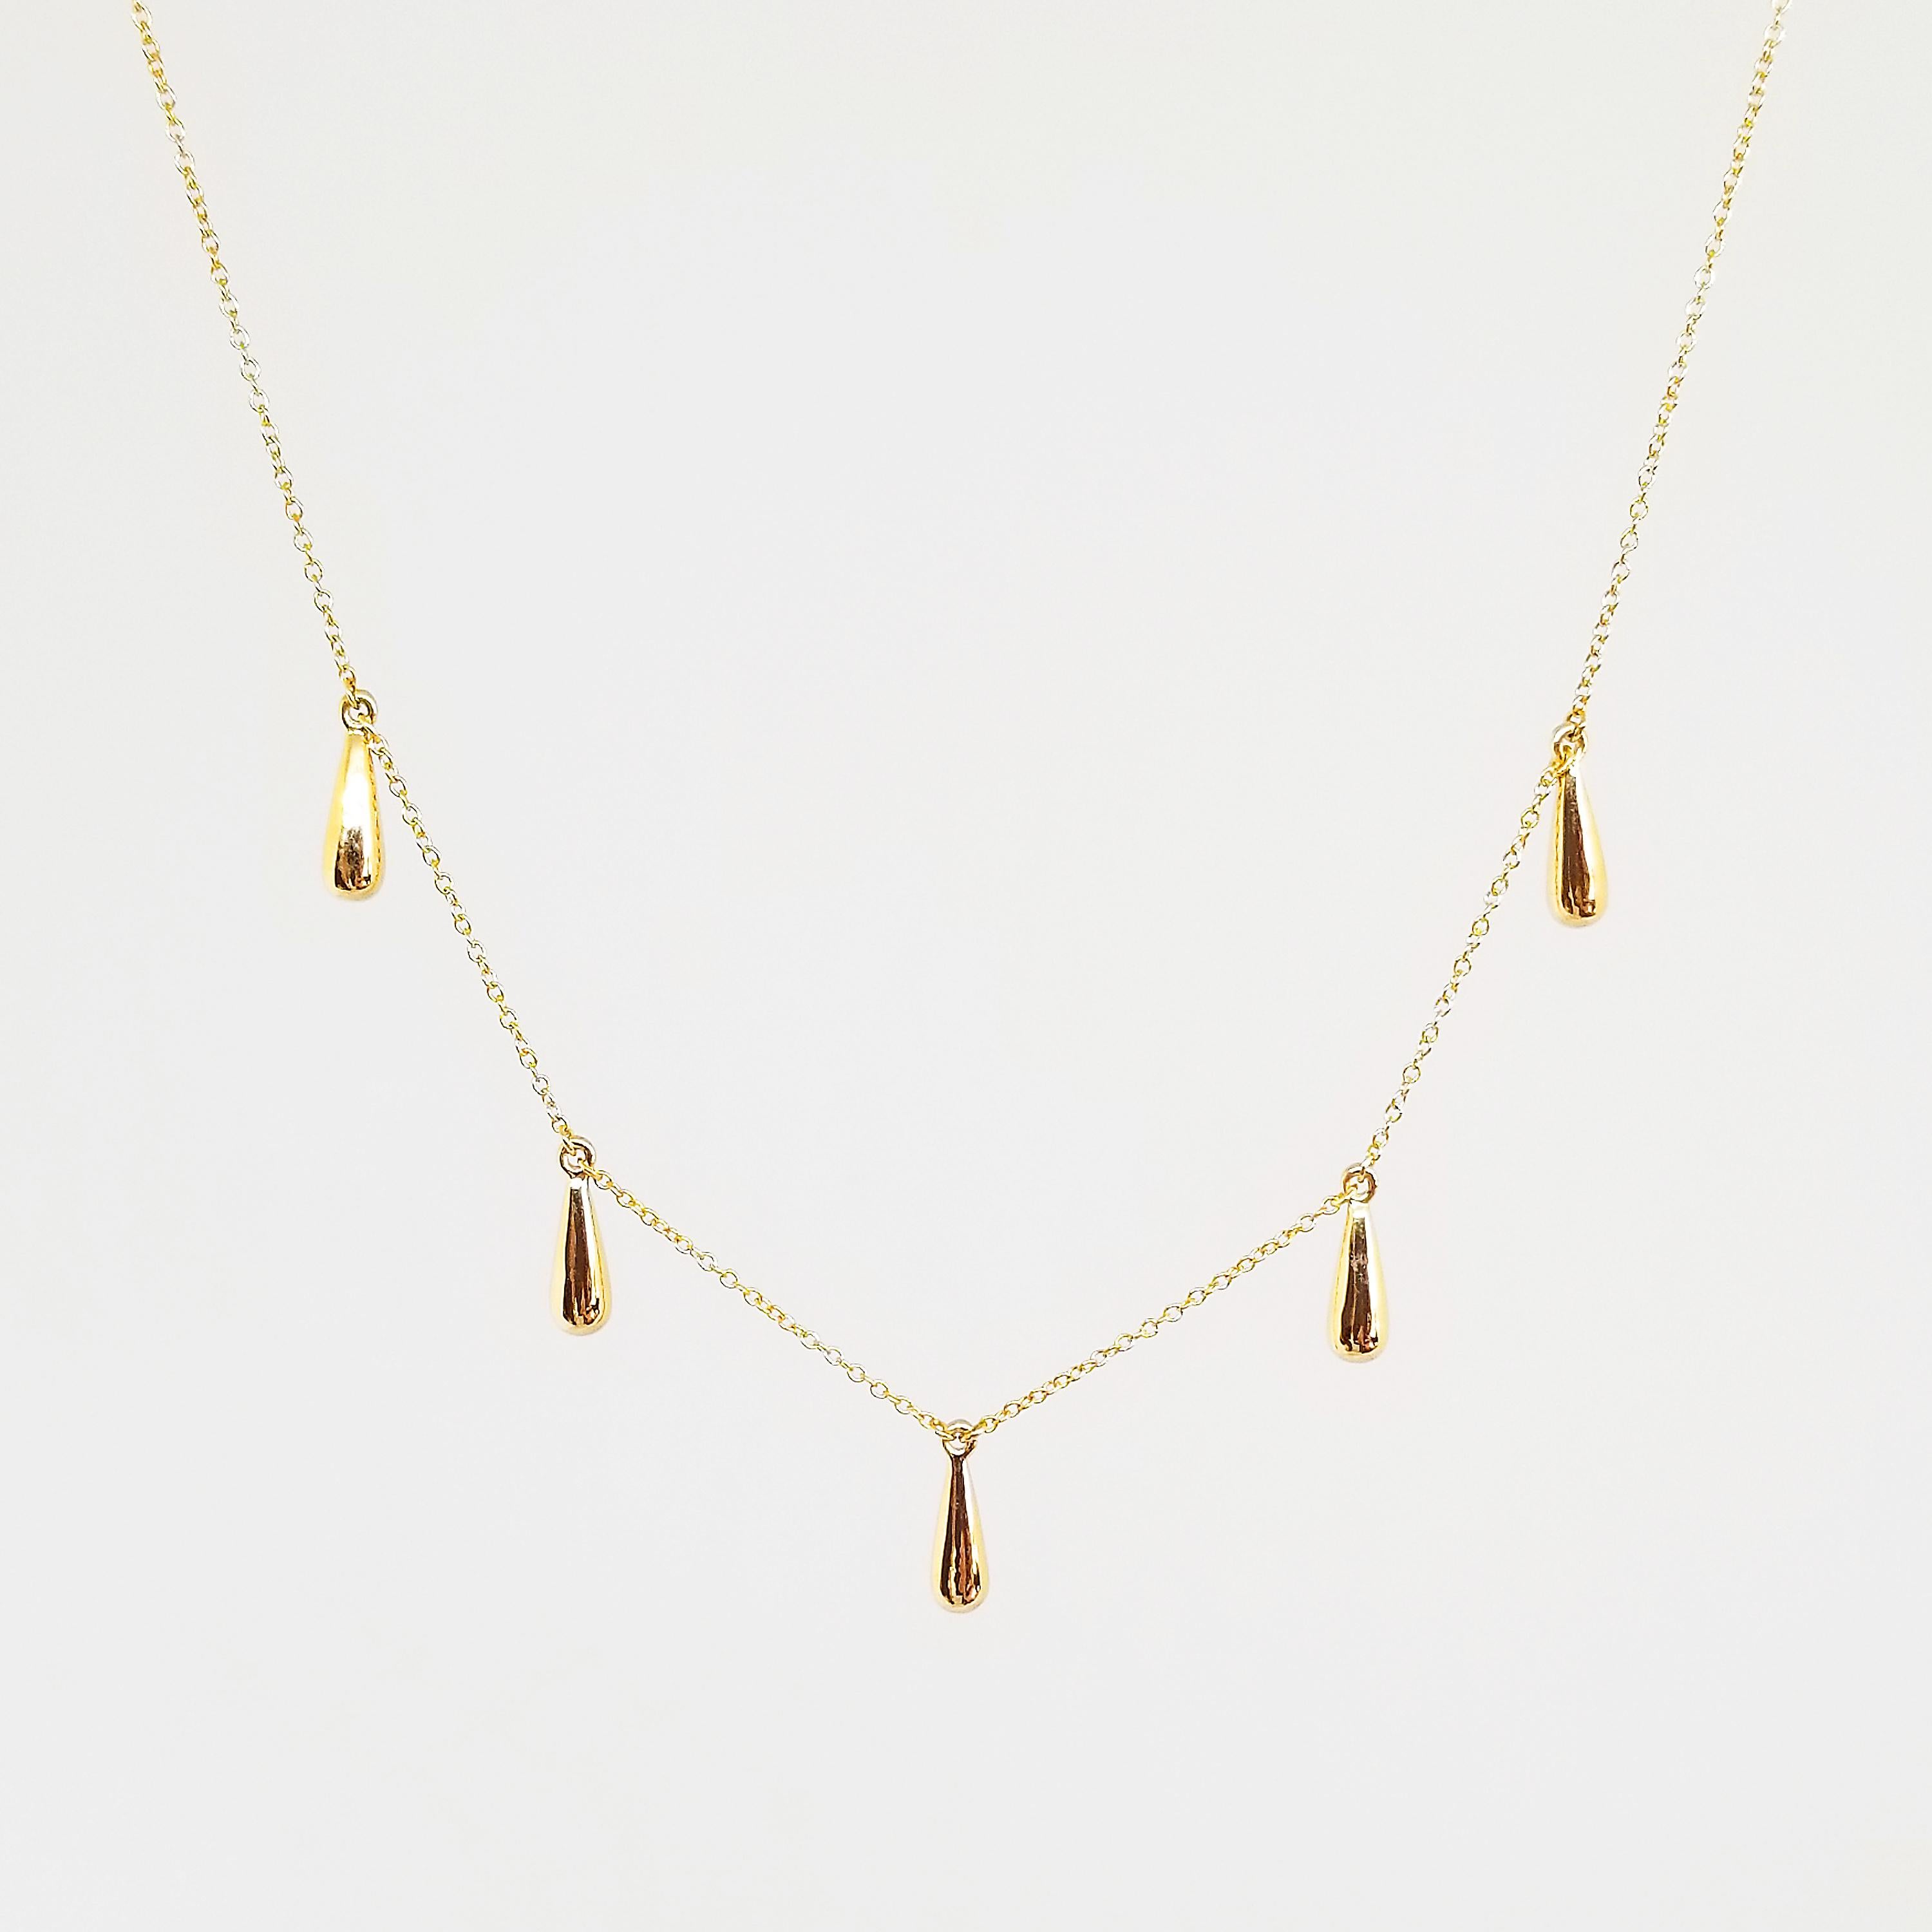 adjustable gold chain necklace